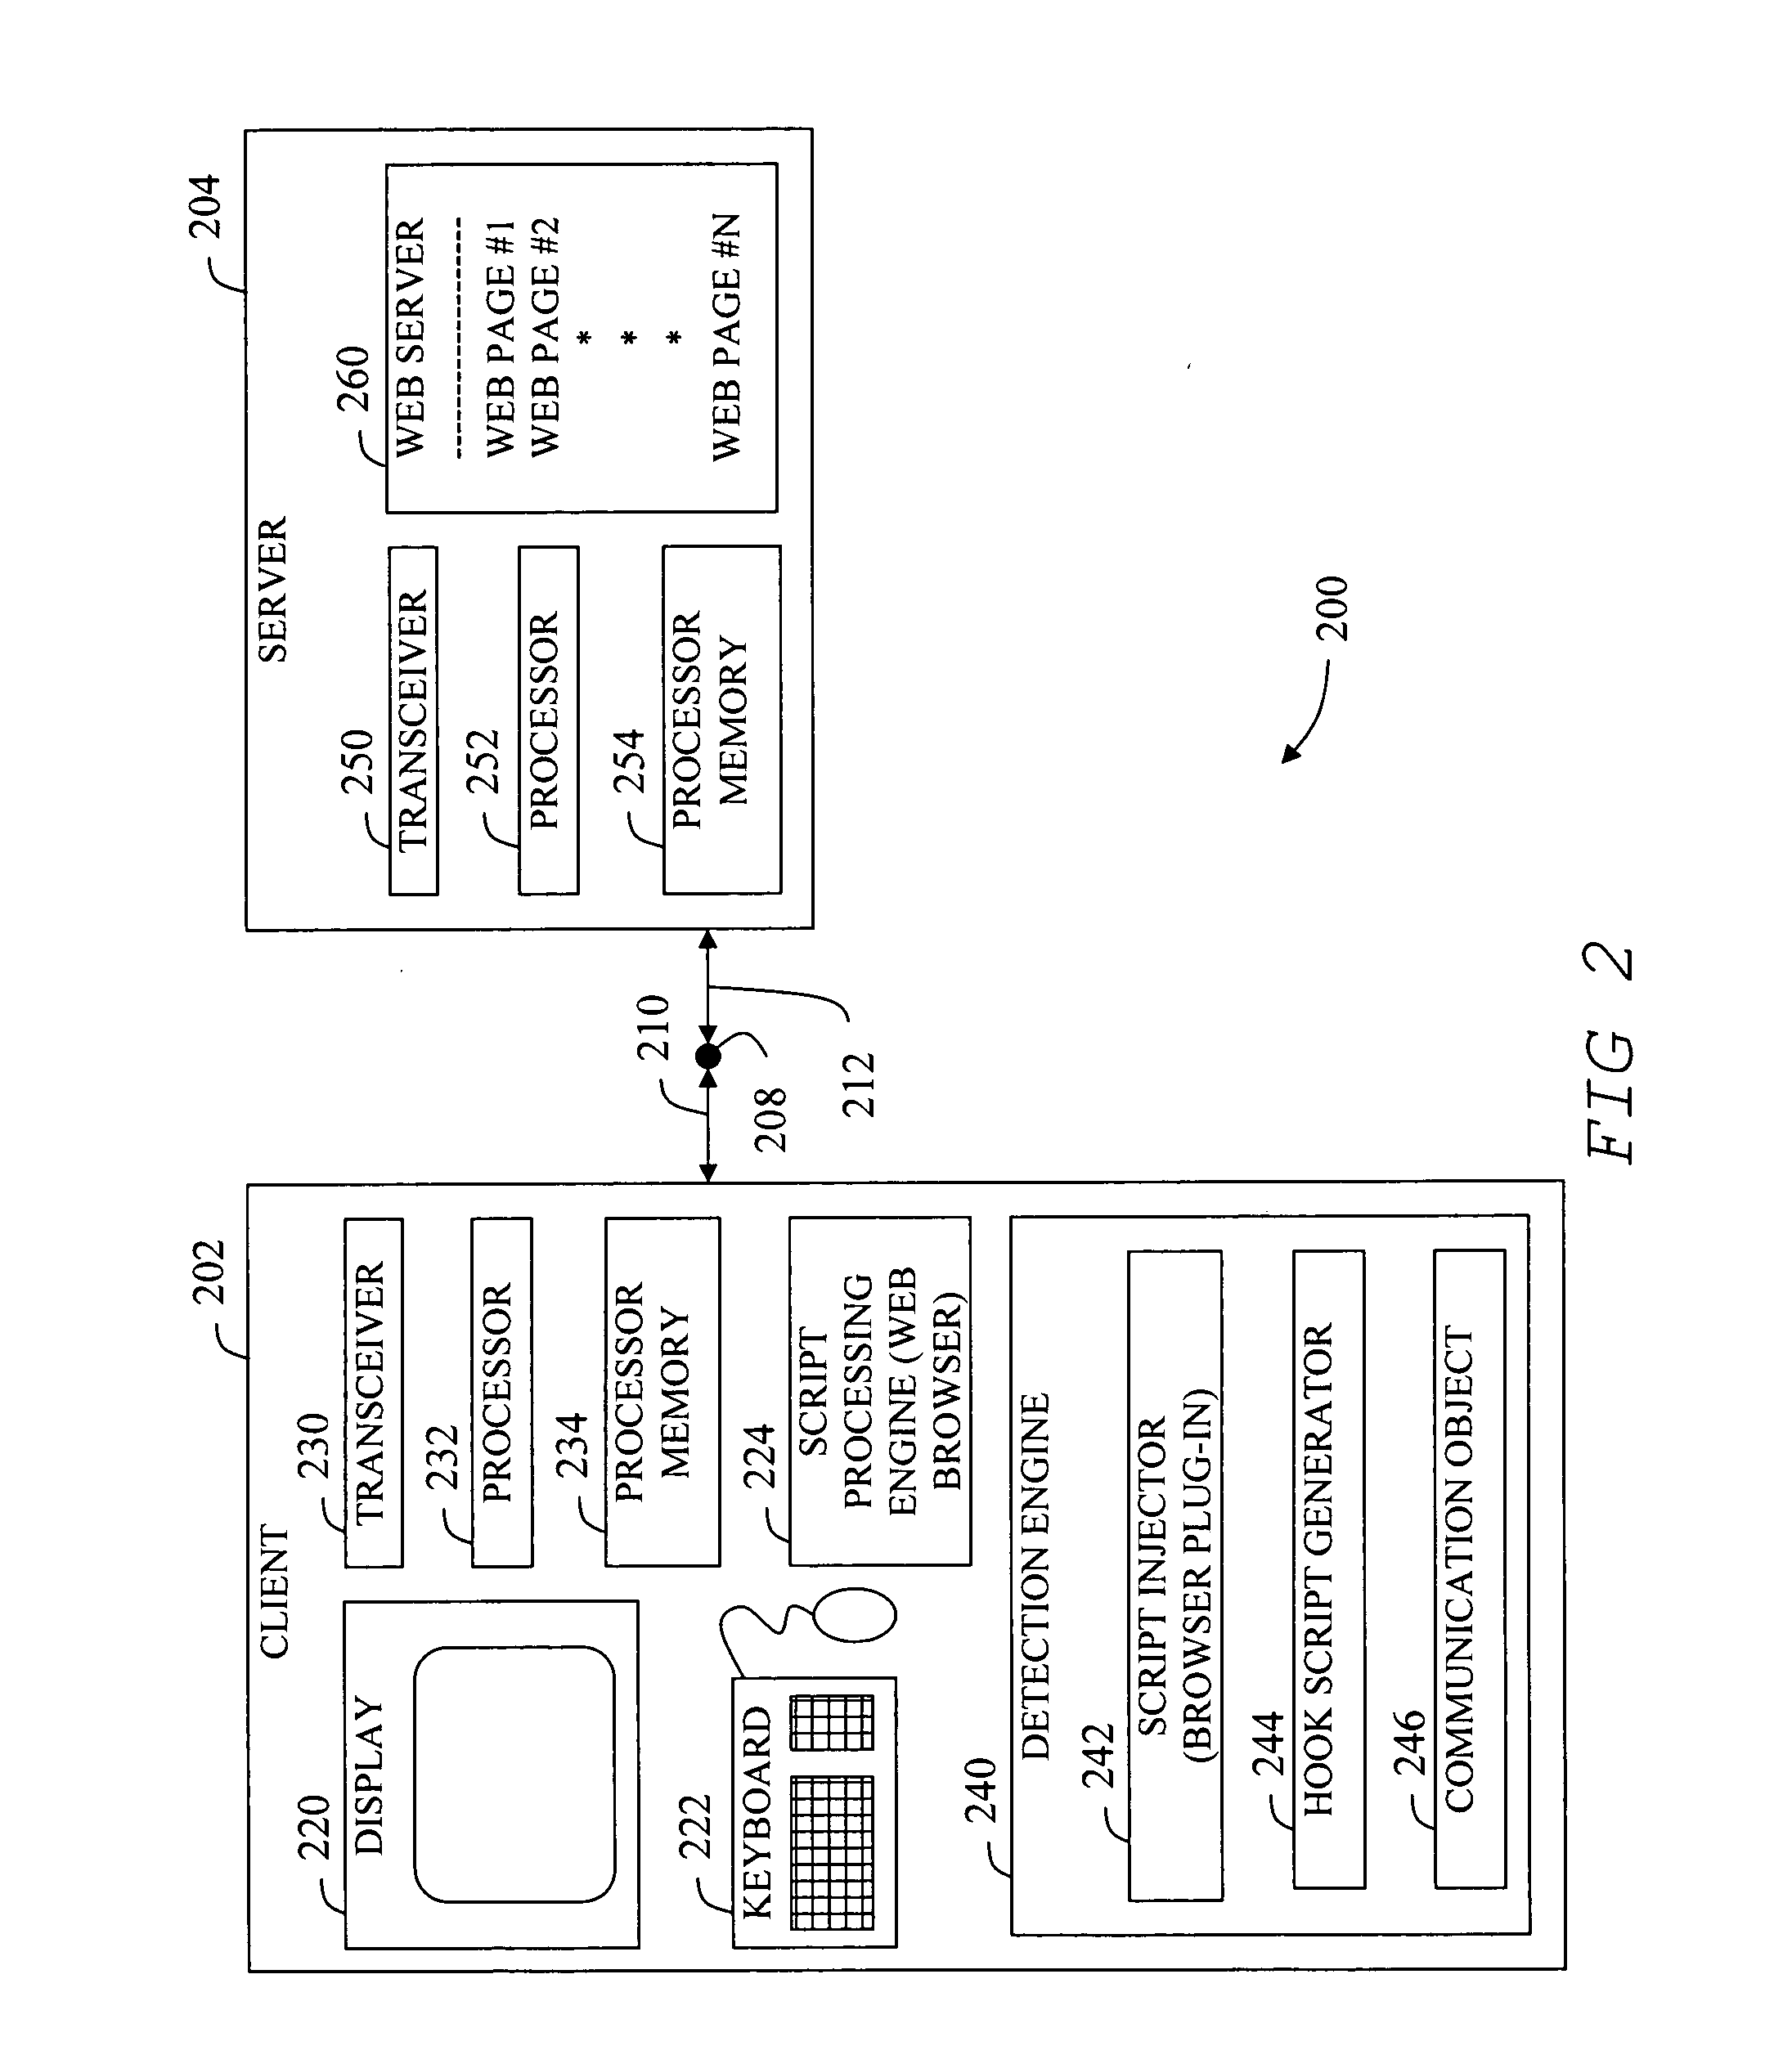 Systems and methods for detecting and disabling malicious script code